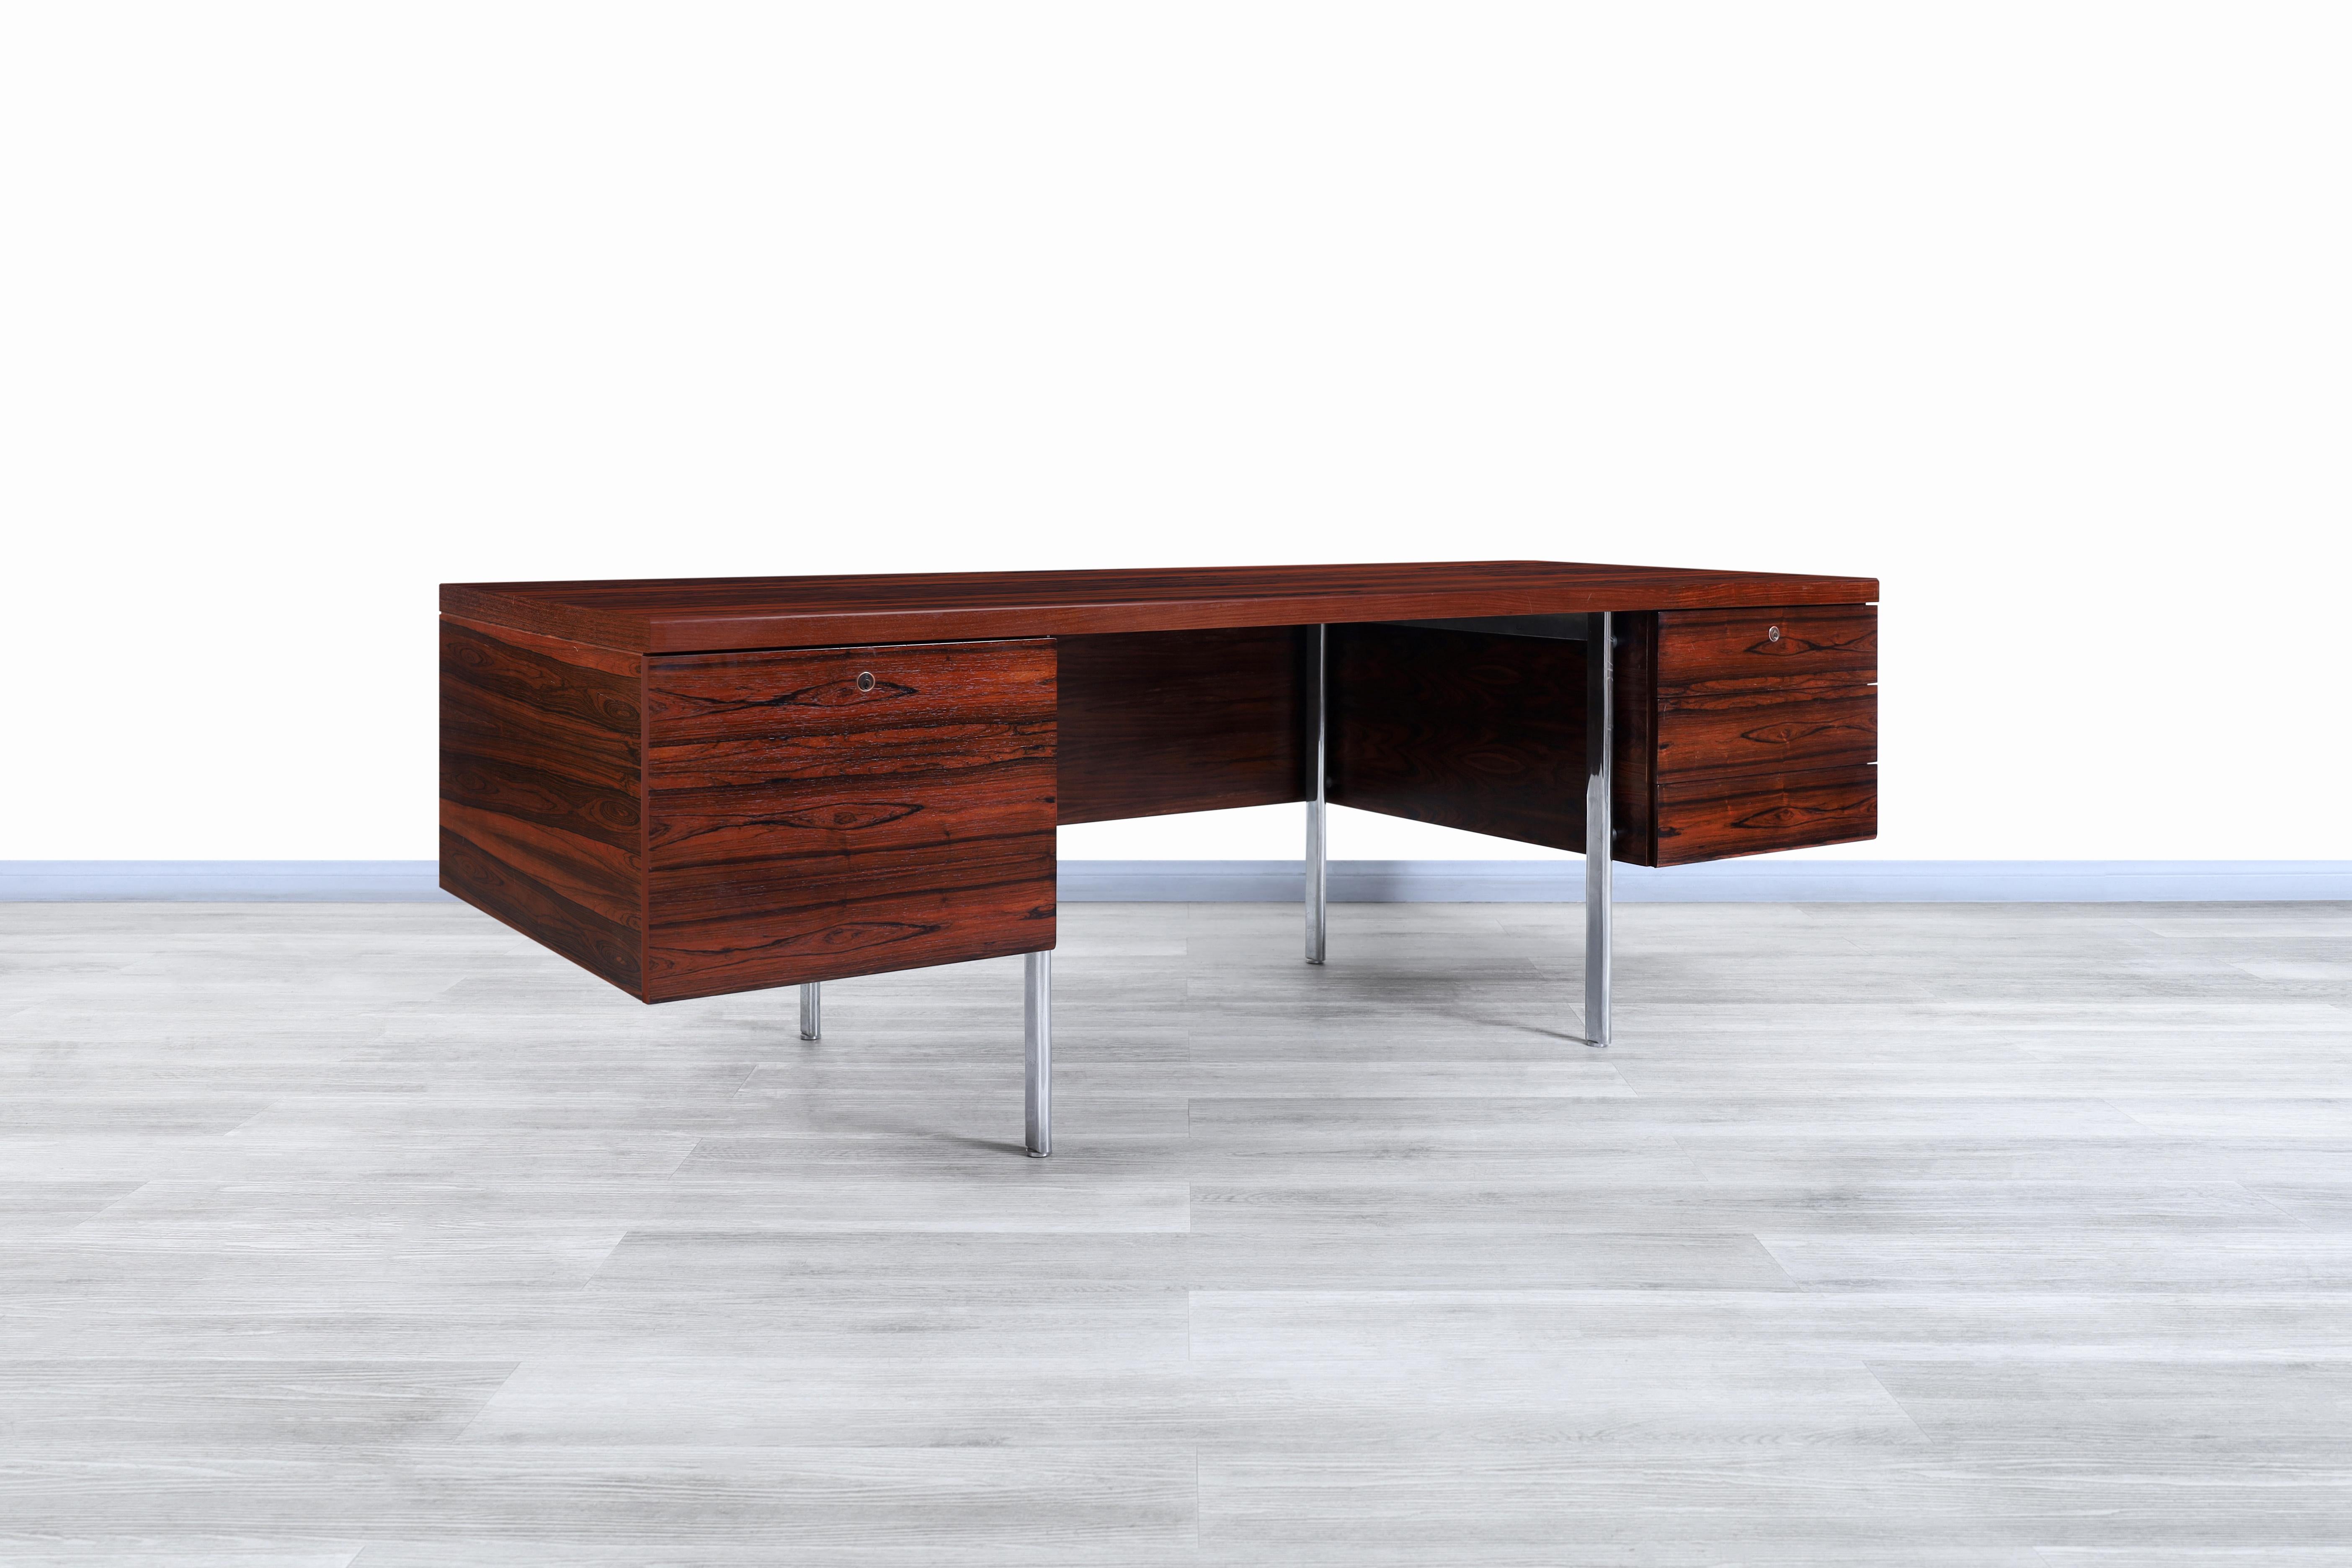 Wonderful Danish modern executive rosewood desk designed and manufactured in Denmark, circa 1960s. This desk has a very particular design that focuses on offering a large workspace and versatility for the user. The desk has been built from Brazilian